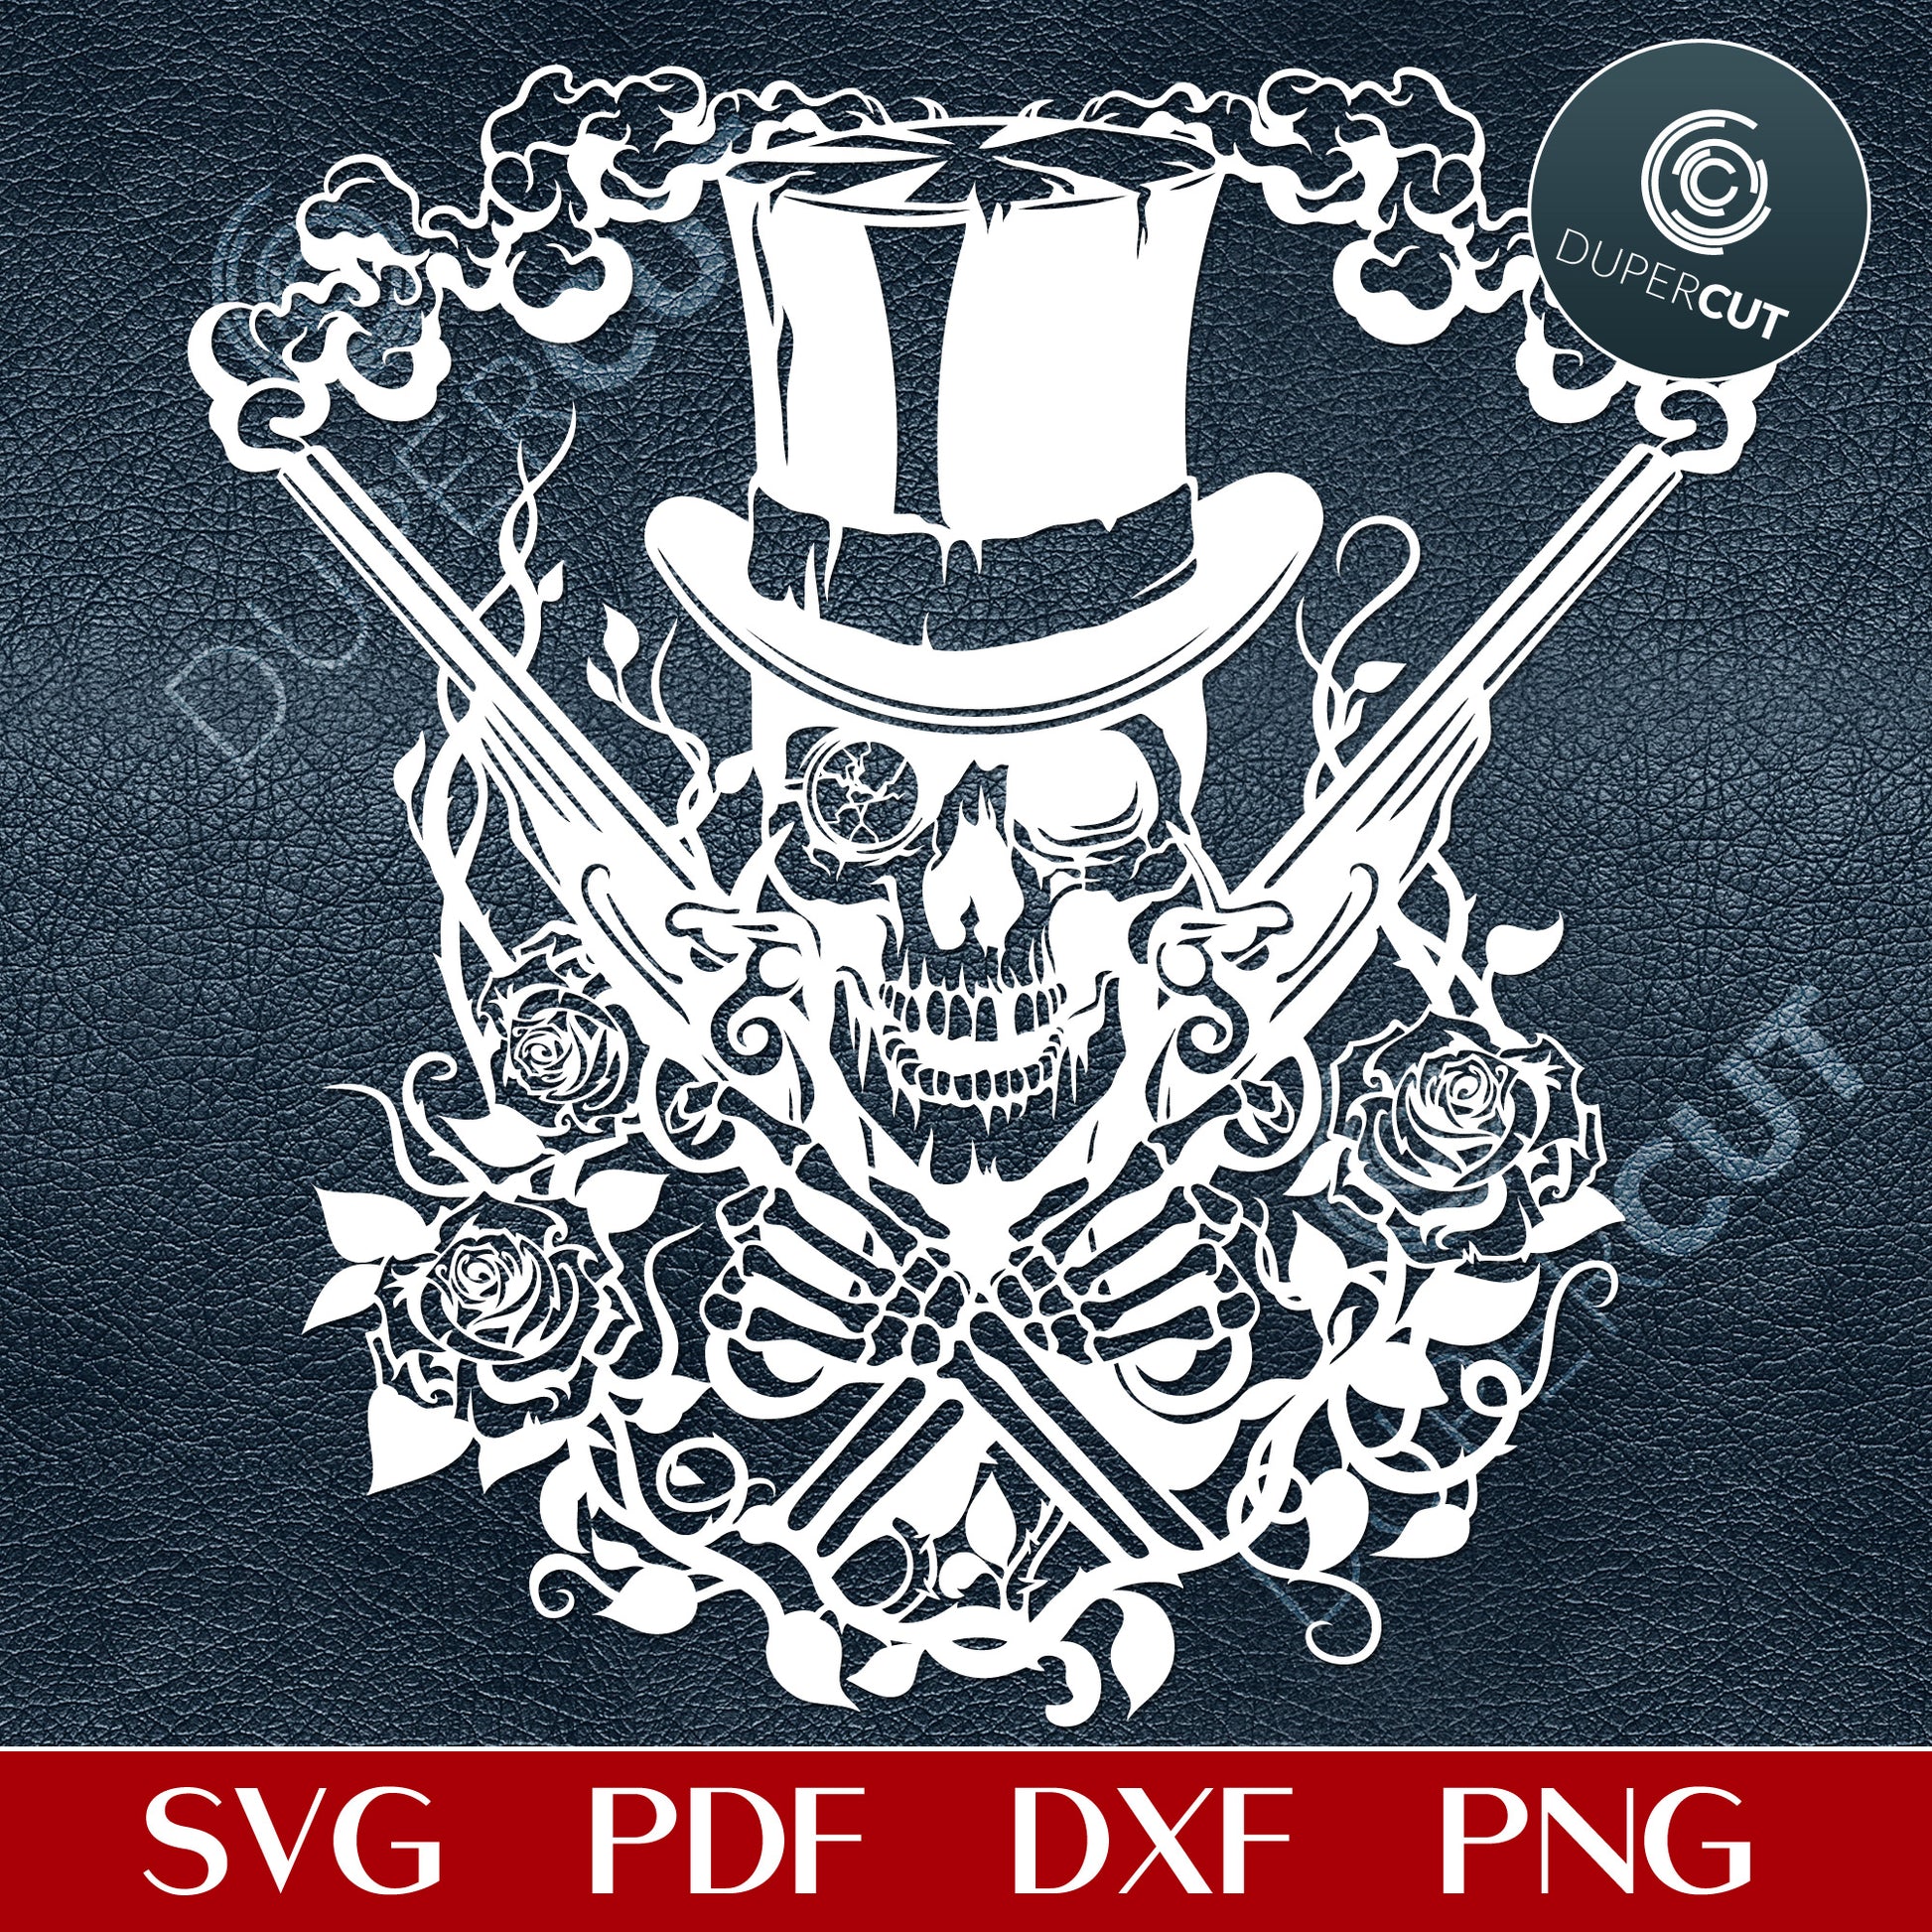 Skull and roses, hands crossed. Papercutting template for commercial use. SVG PNG JPG files for Silhouette Cameo, Cricut, Glowforge, DXF for CNC, laser cutting, print on demand